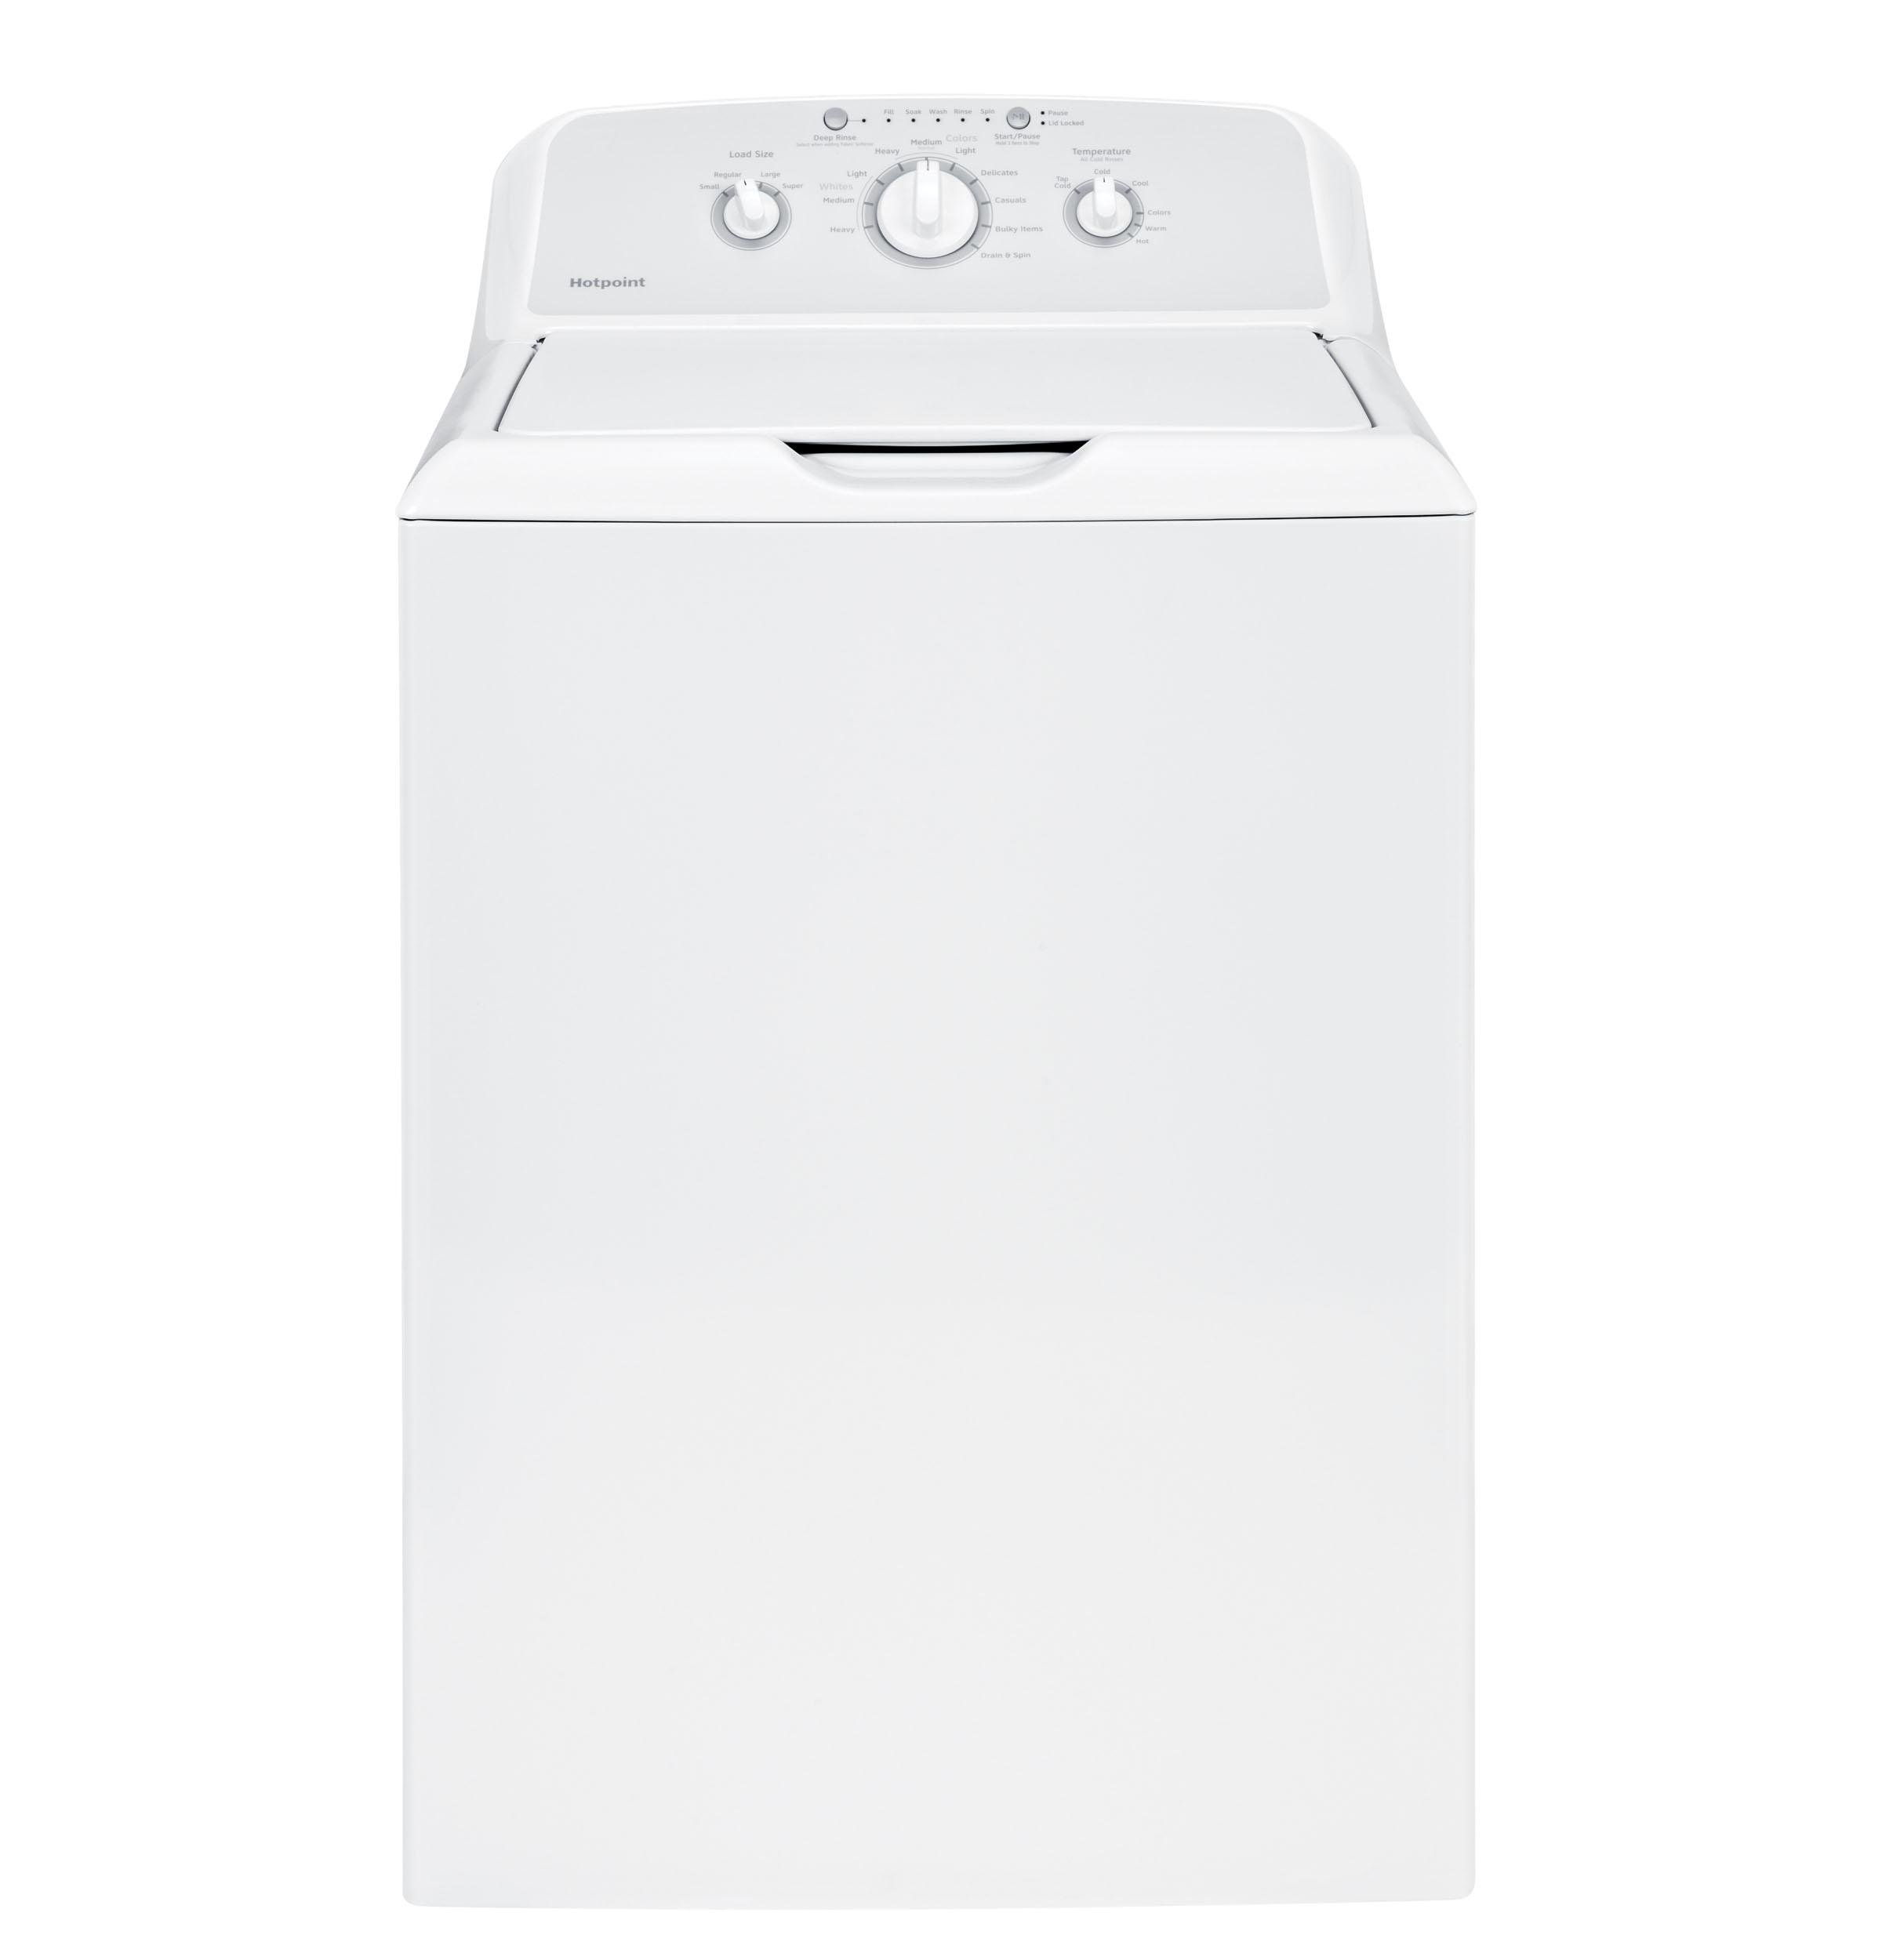 white top load washer with knob controls